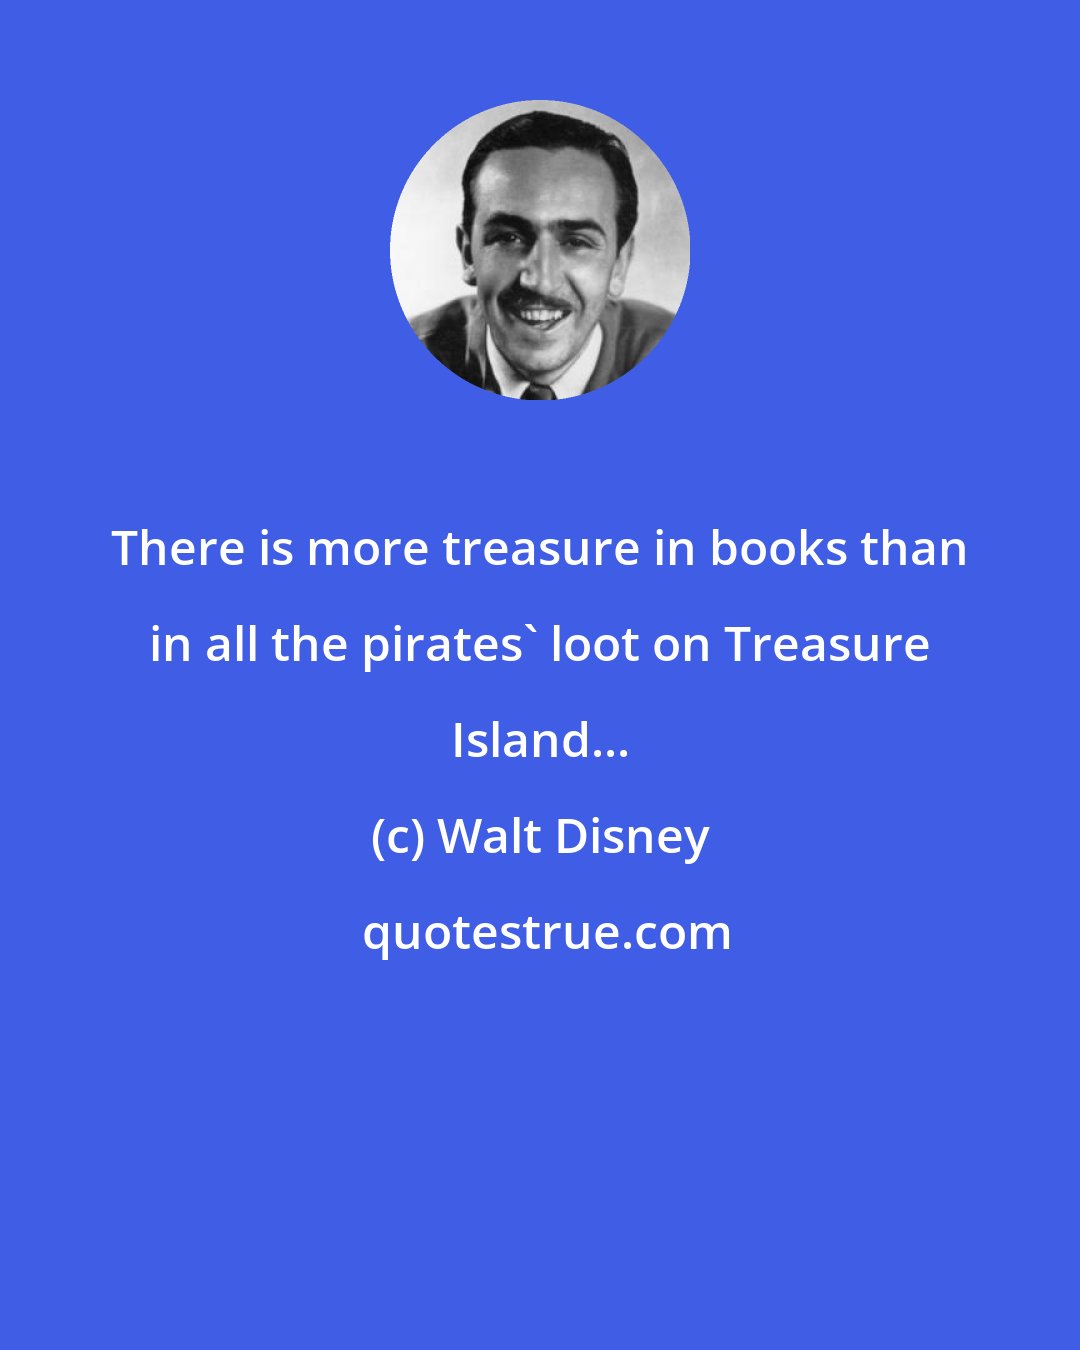 Walt Disney: There is more treasure in books than in all the pirates' loot on Treasure Island...